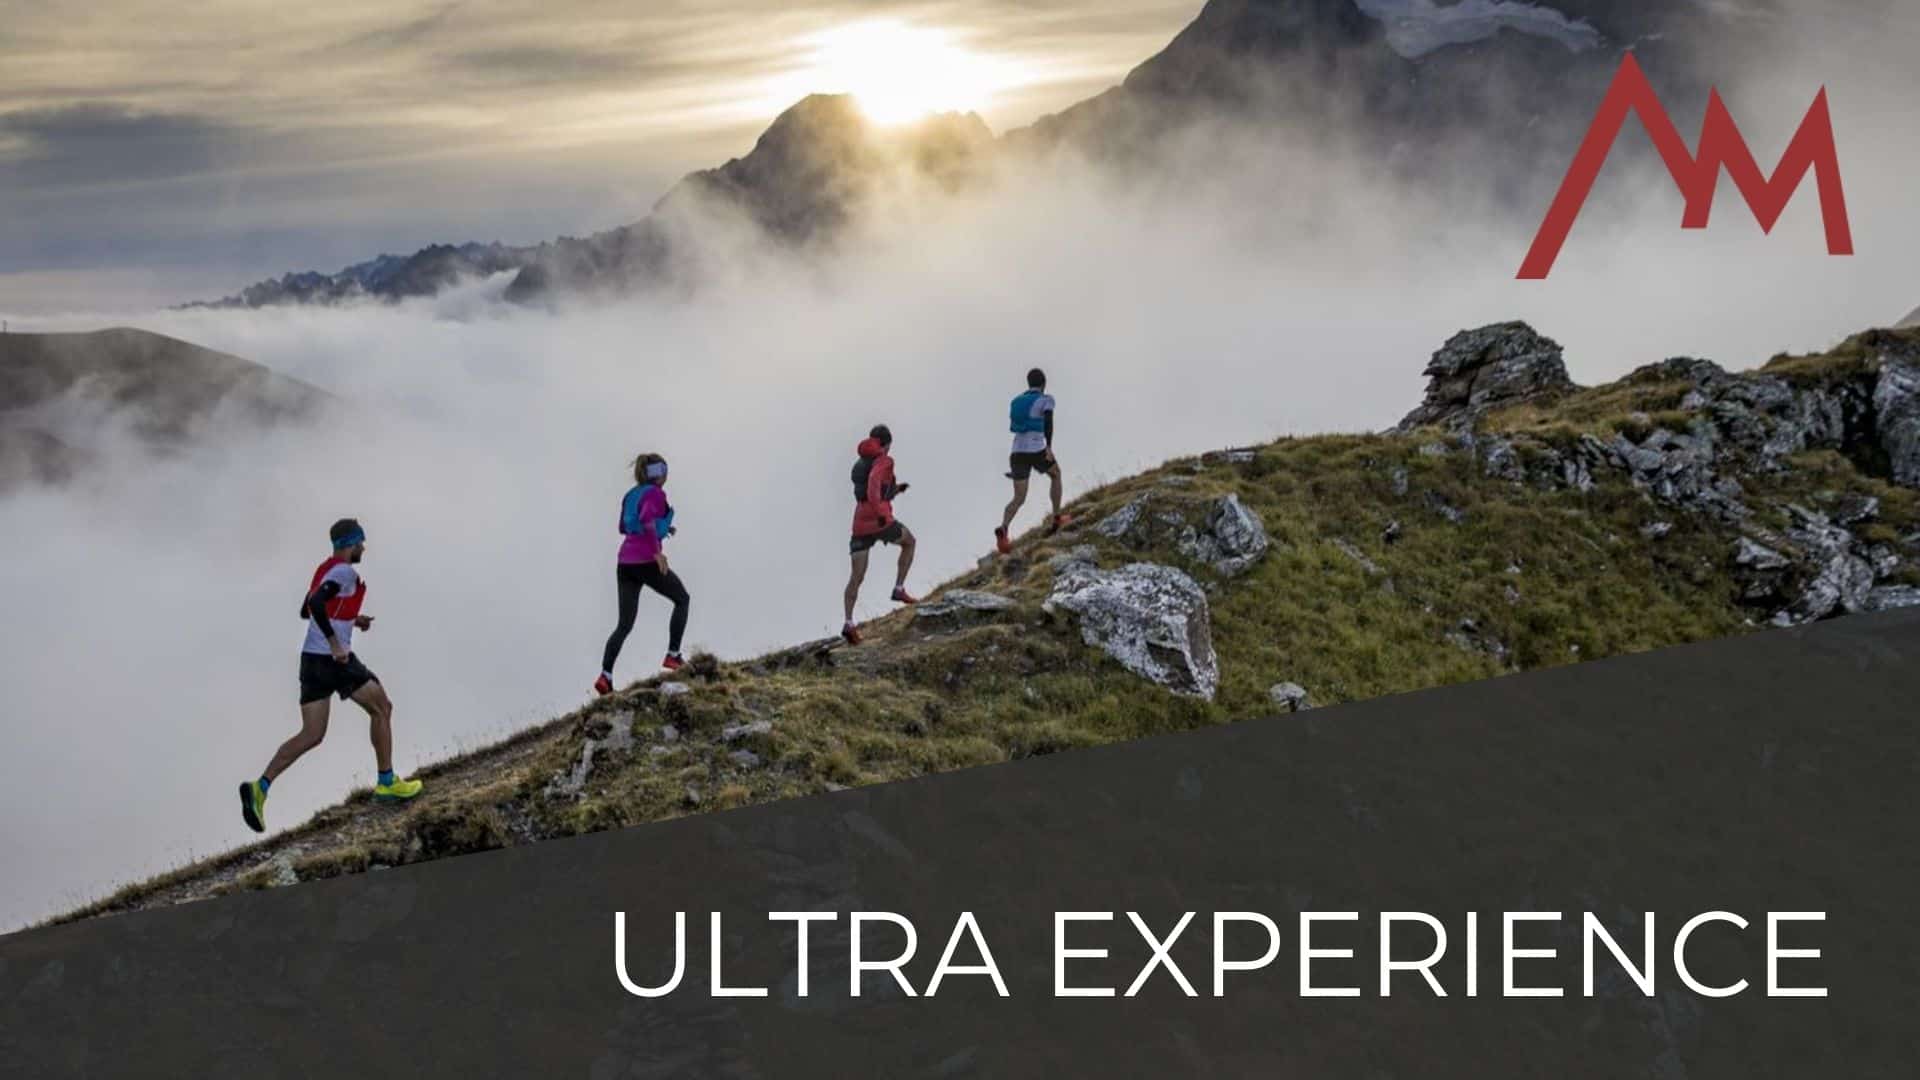 ULTRA EXPERIENCE